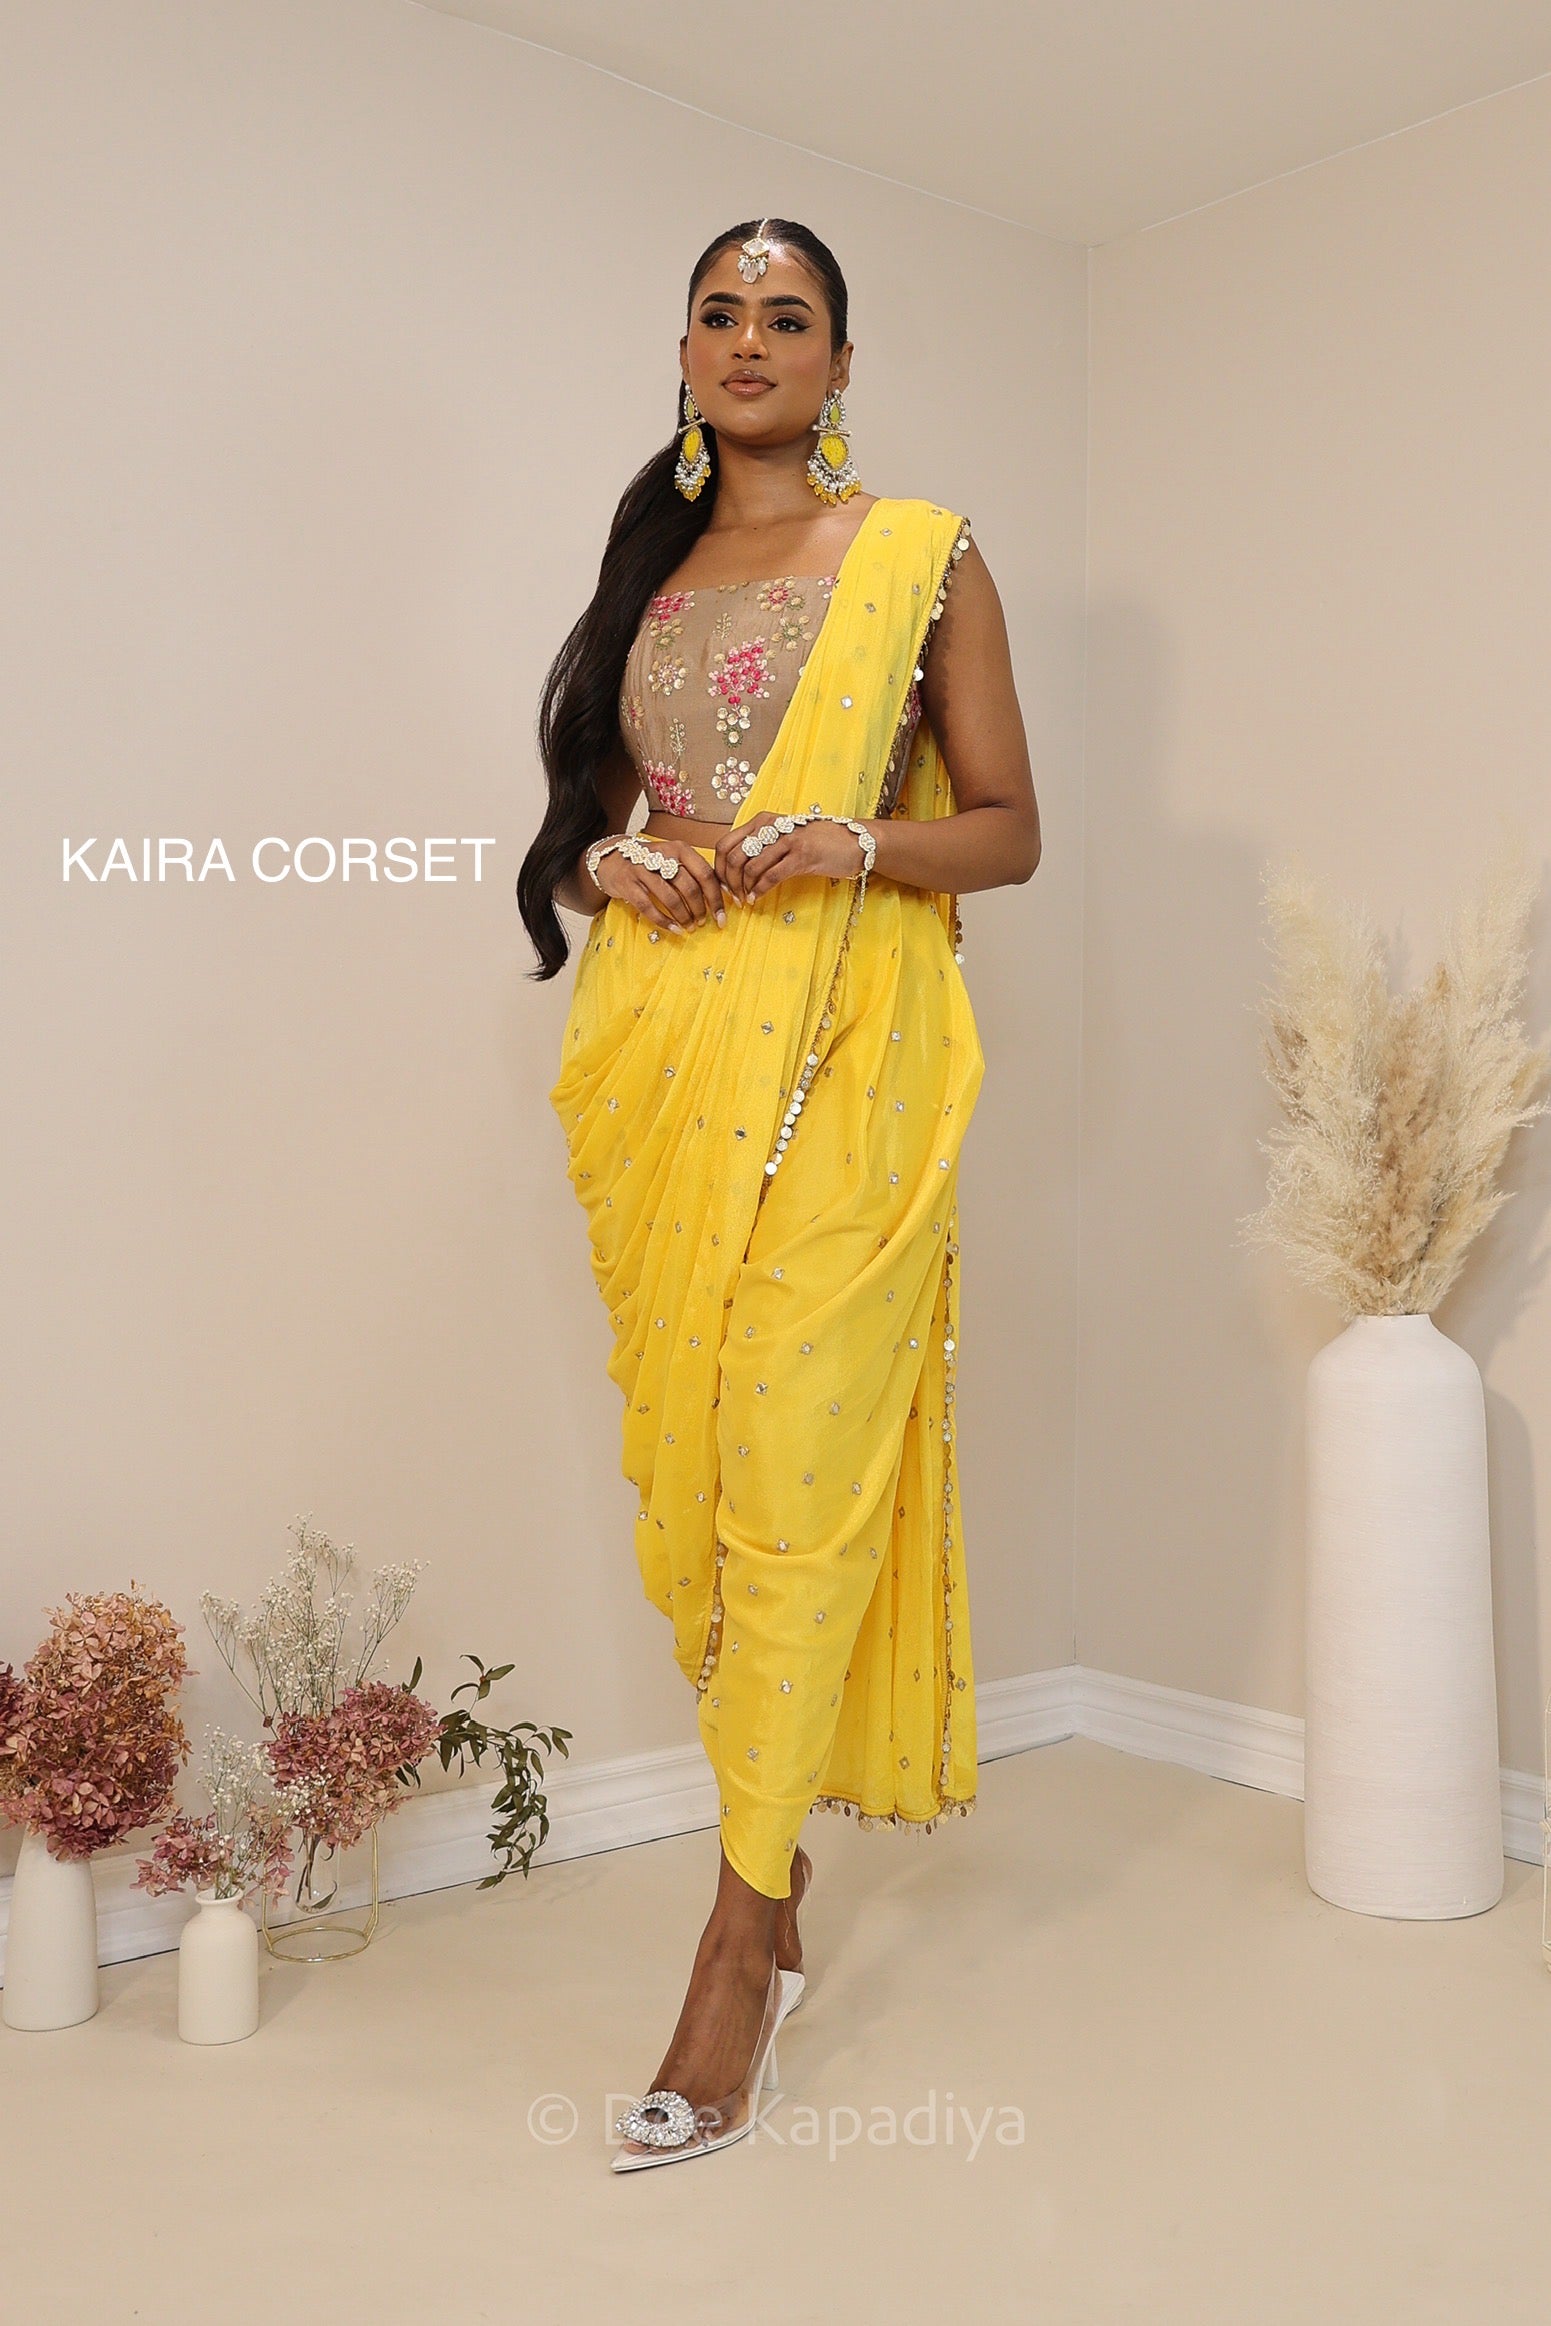 Ananya giving you all the yellow vibes in this gorgeous silky dhoti saree with corset for haldi or fiesta event